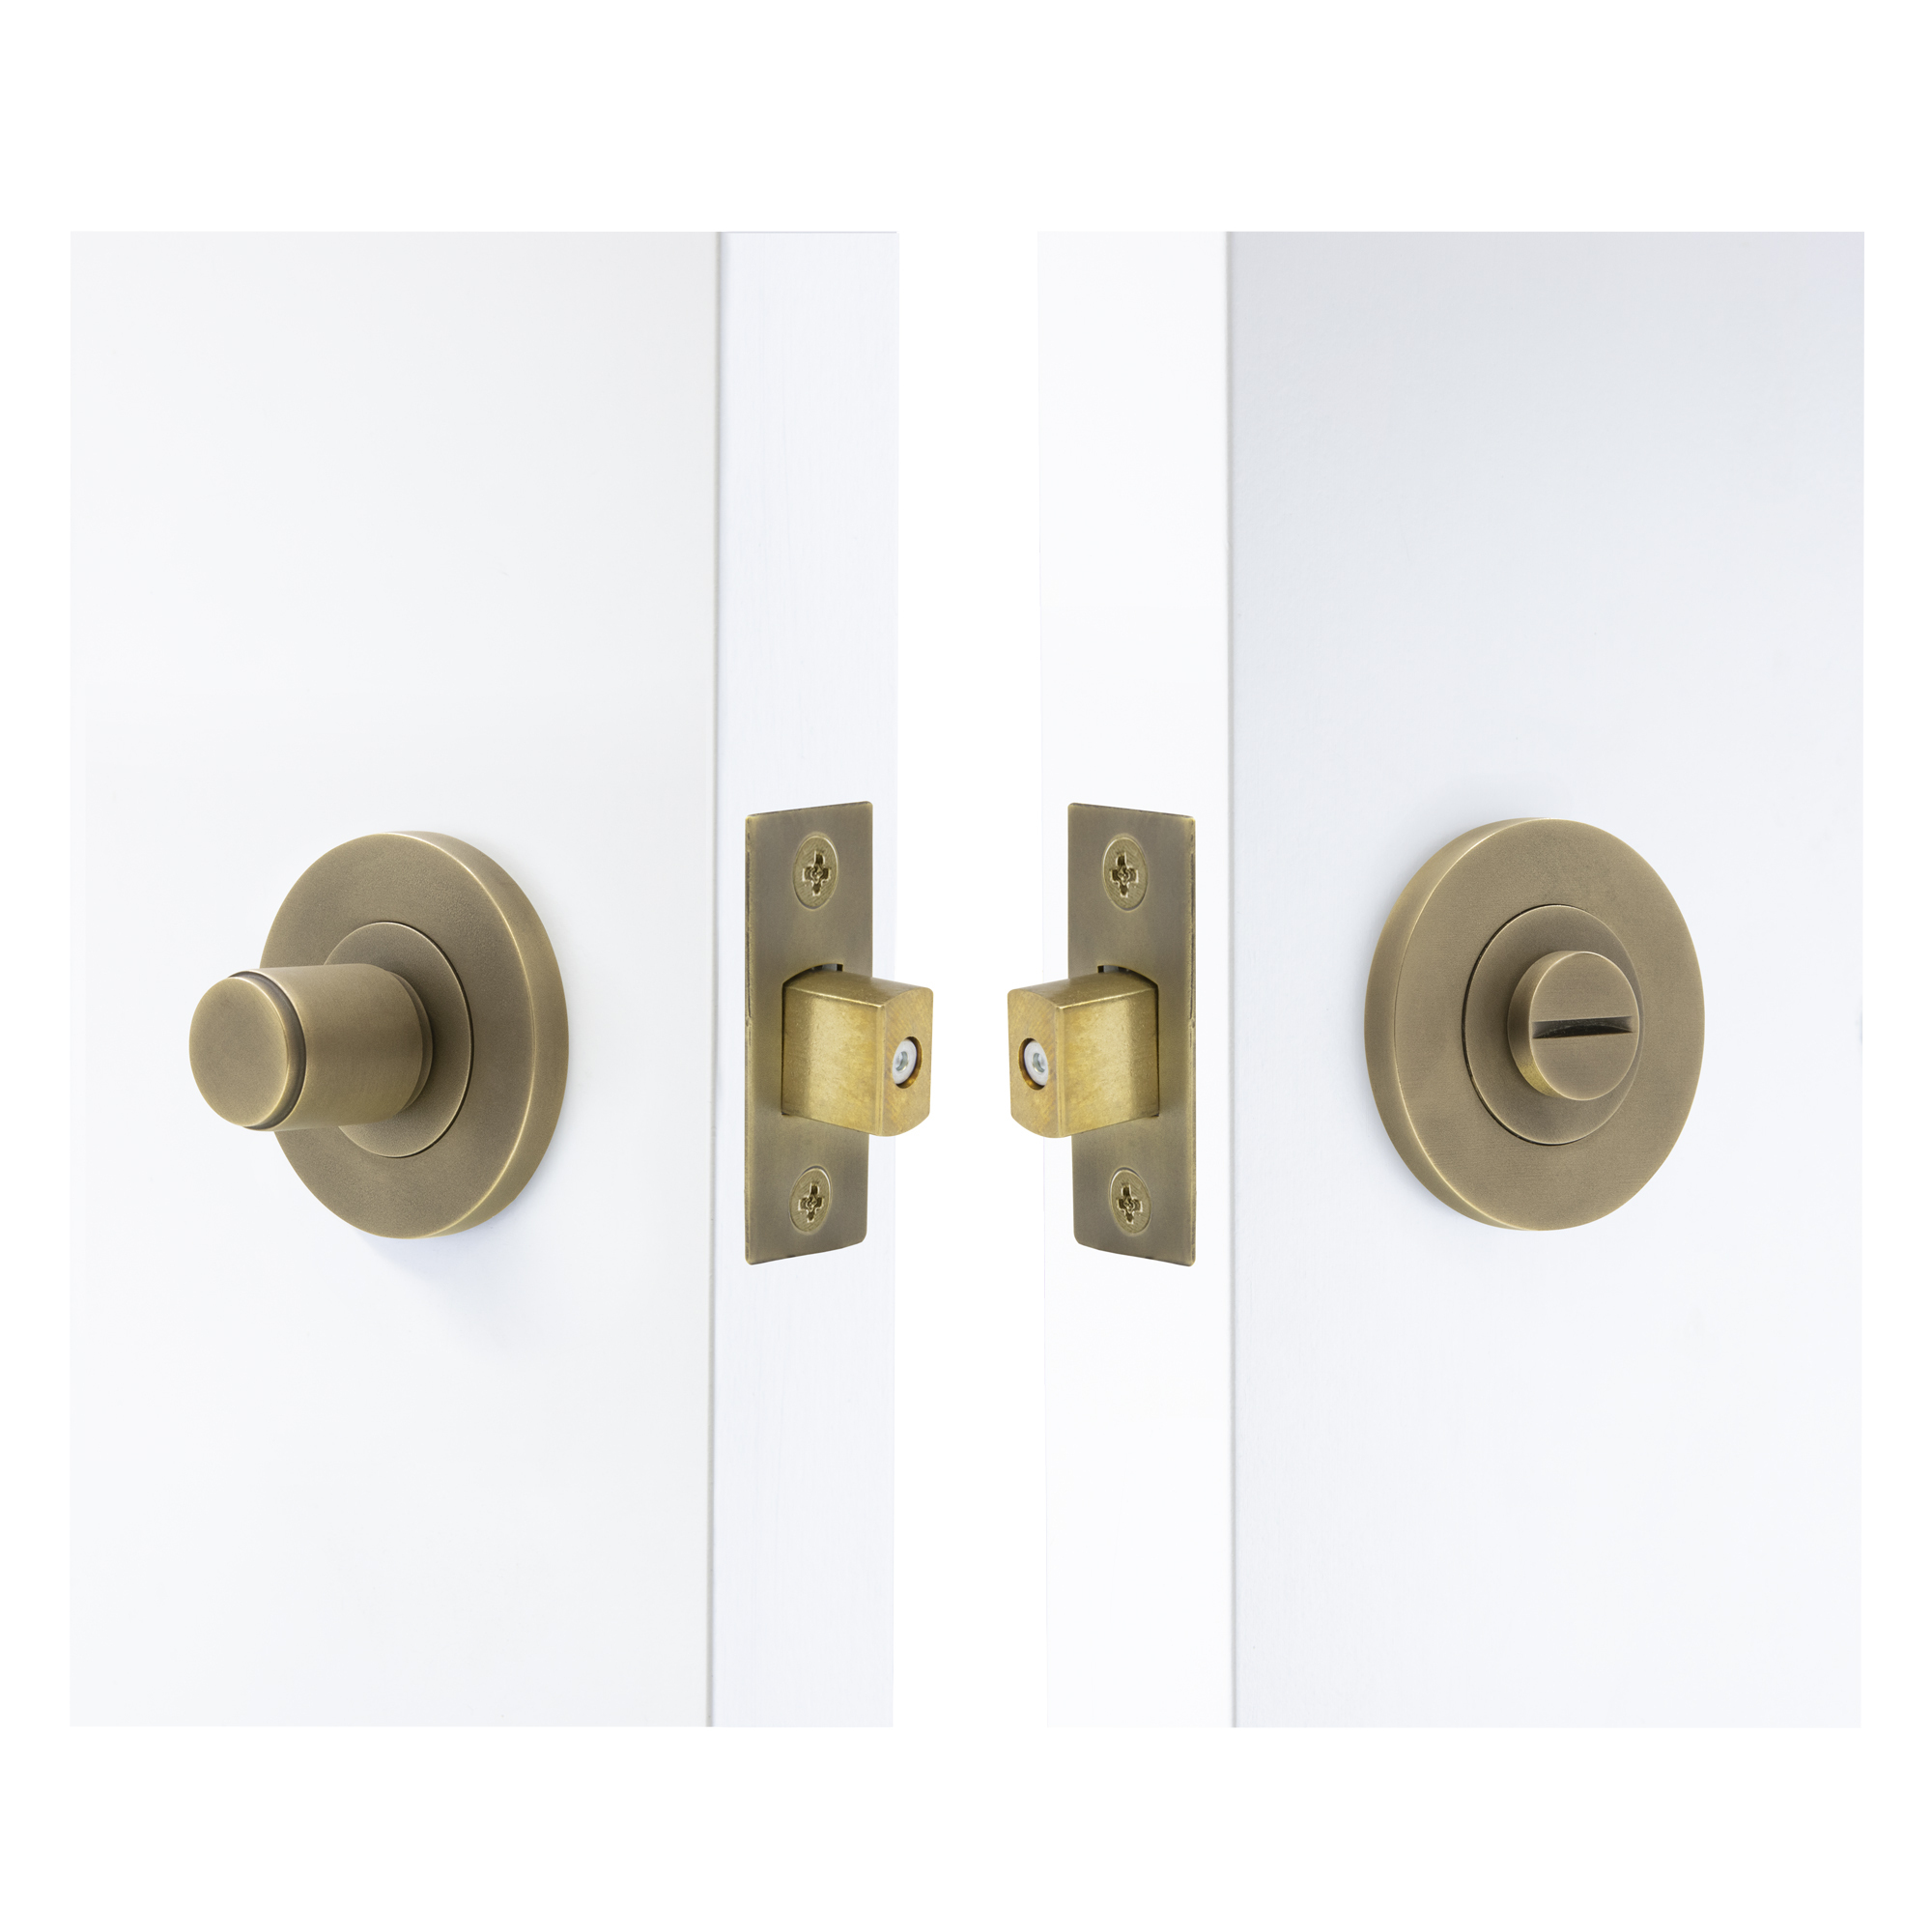 The Milford PRIVACY Set in Polished Brass with Oval Door Knobs